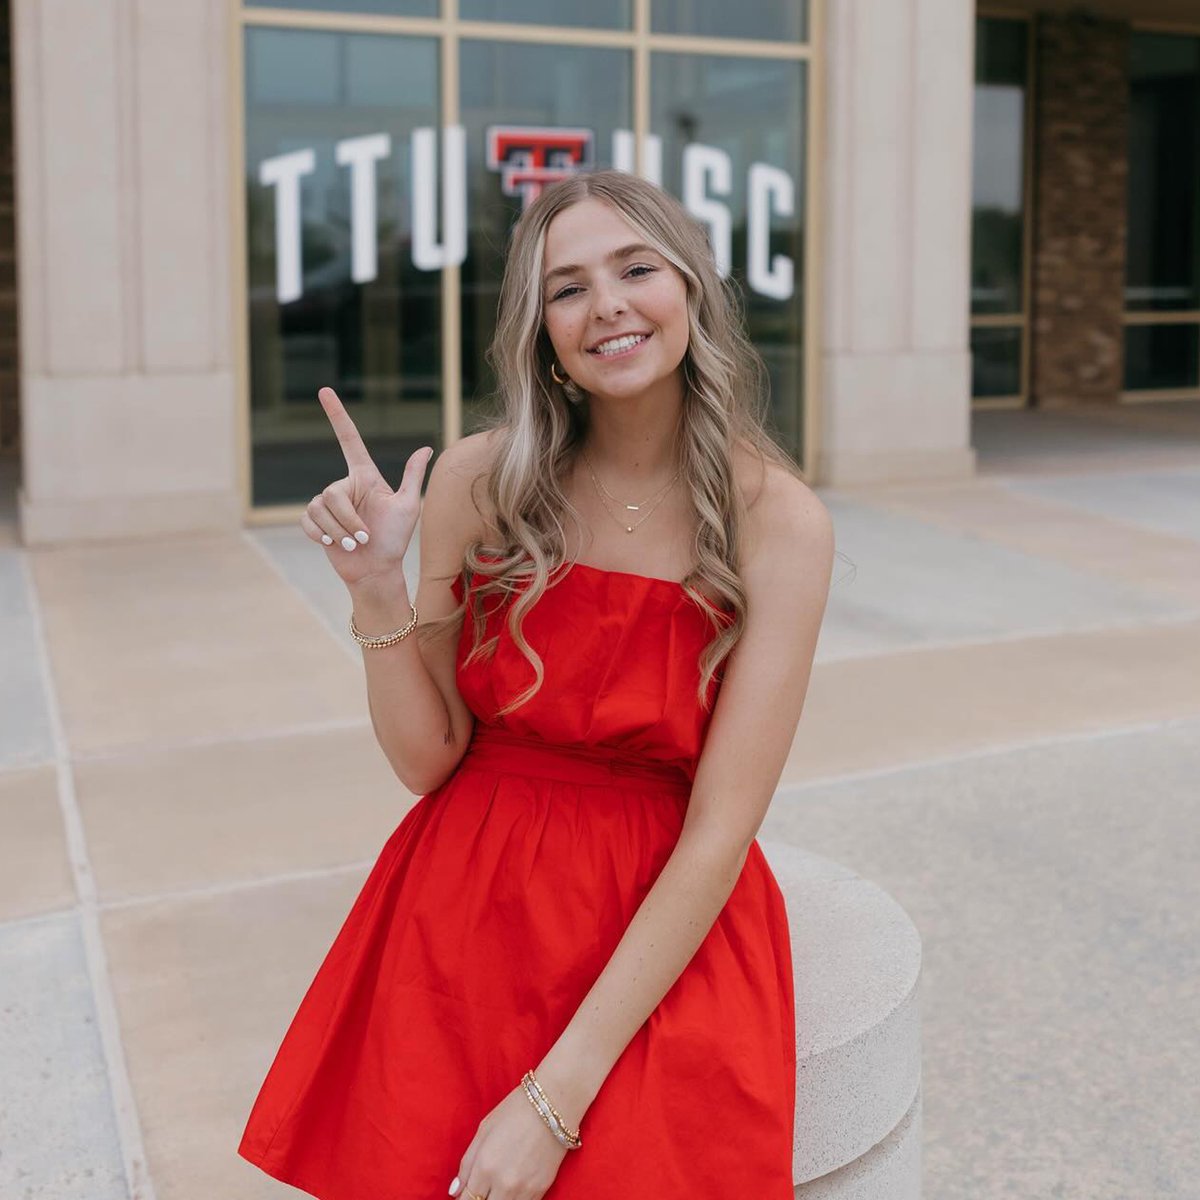 “Future OT, coming 2027” 👆 Haley, an incoming student, is excited to begin her studies in the @TTUHSC_SHP Doctor of #OccupationalTherapy program! #OTmonth